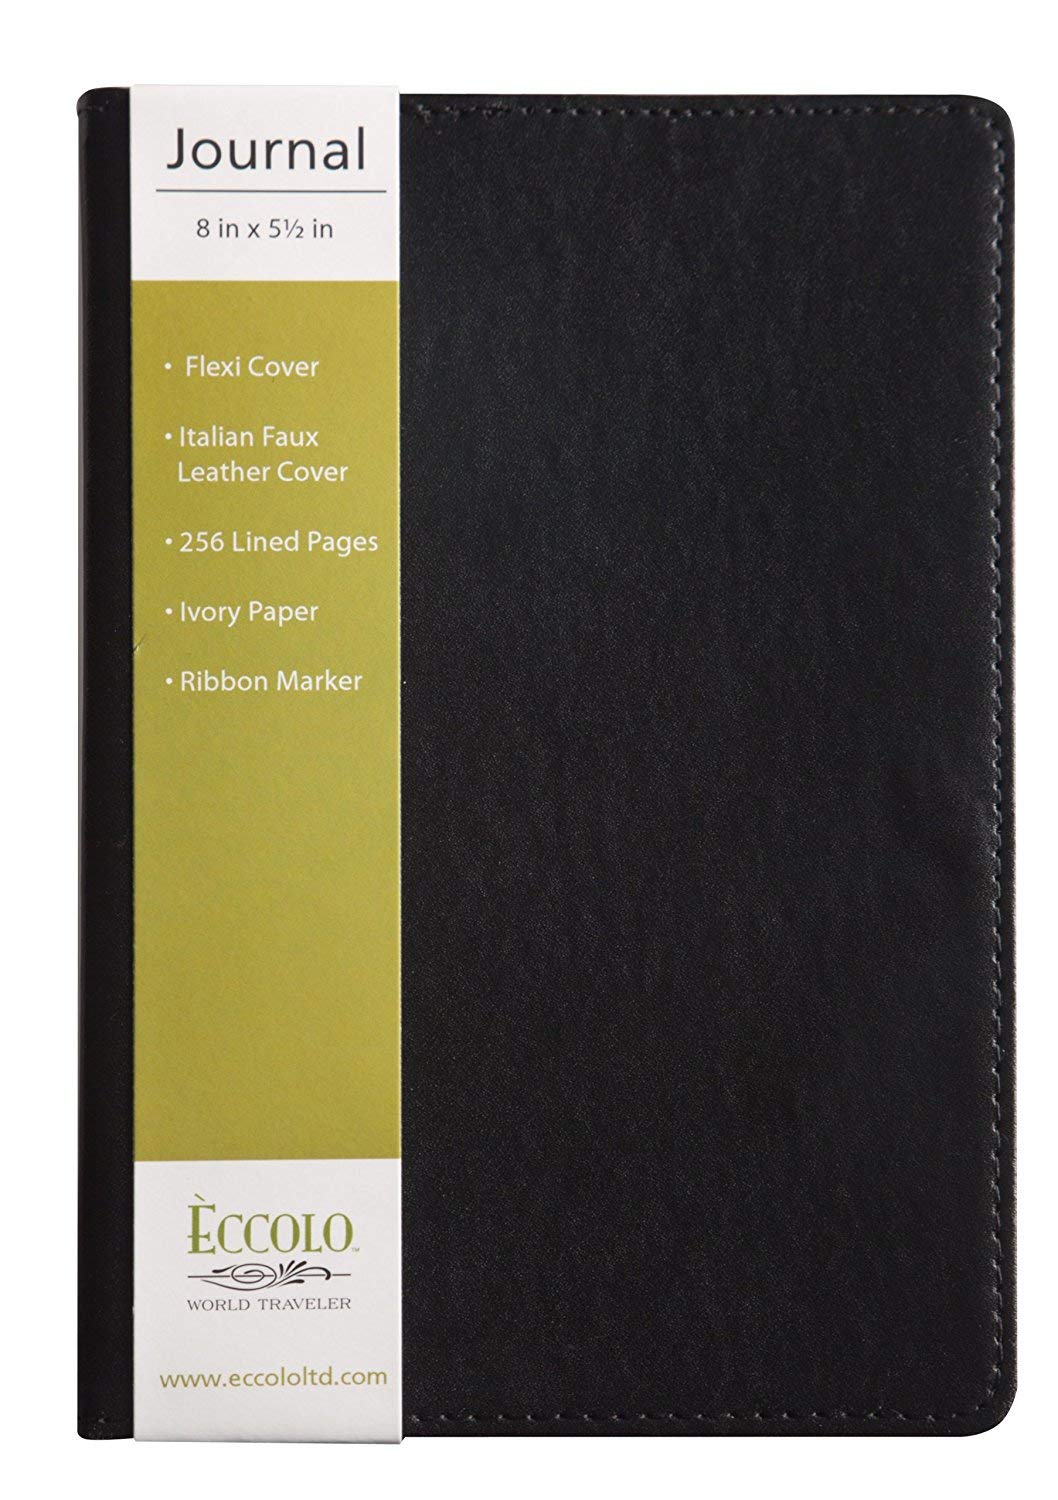 Eccolo Simple Professional Journal Notebook Black Faux Leather Cover